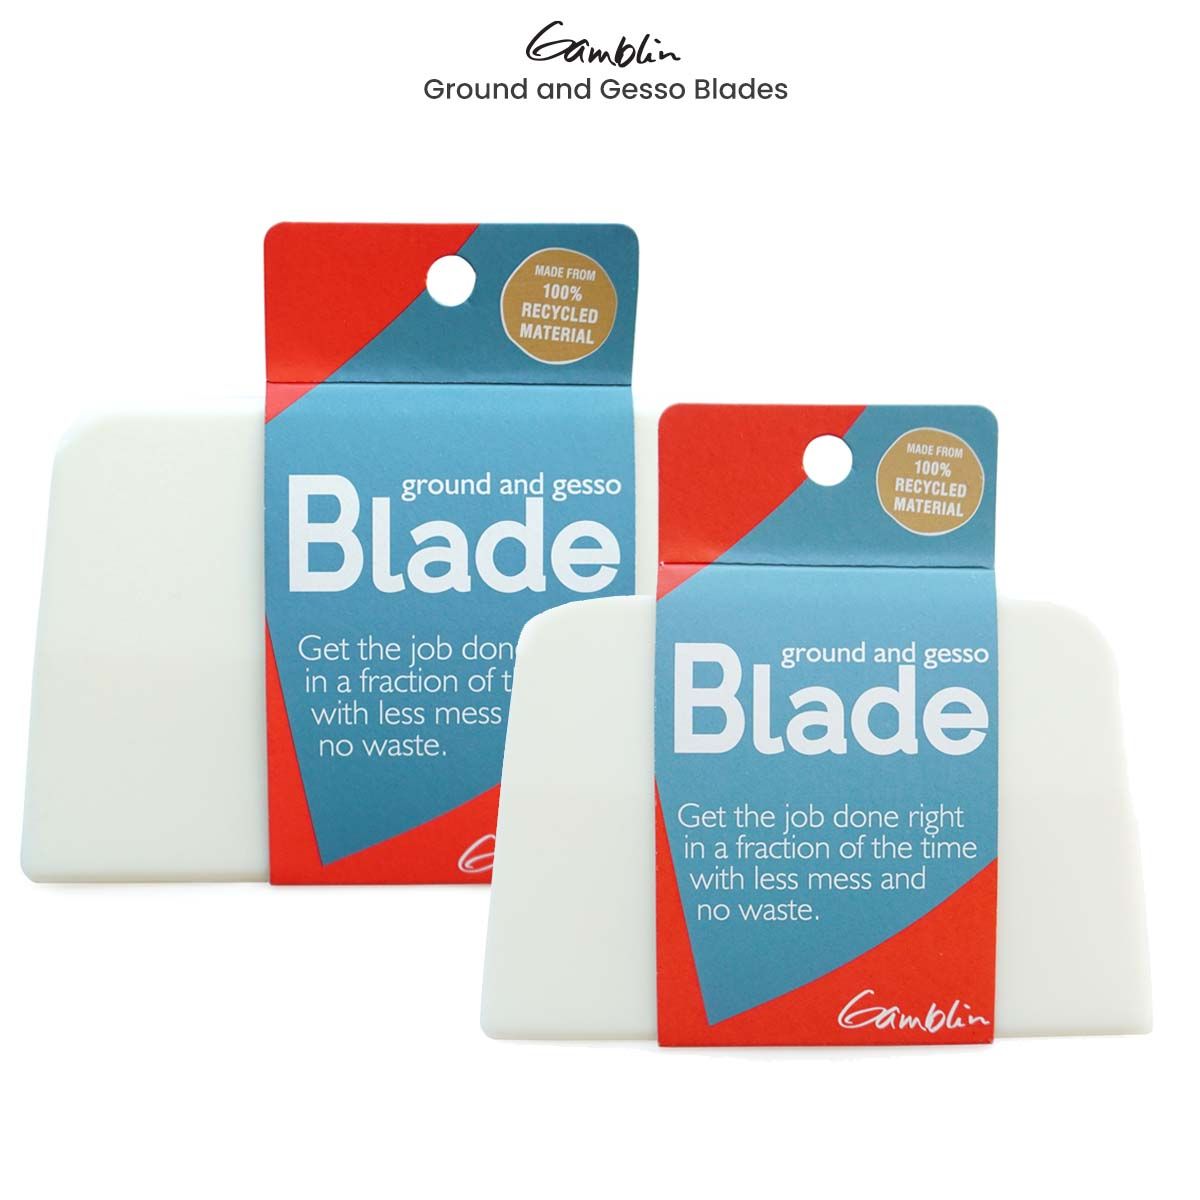 Gamblin Ground and Gesso Blades